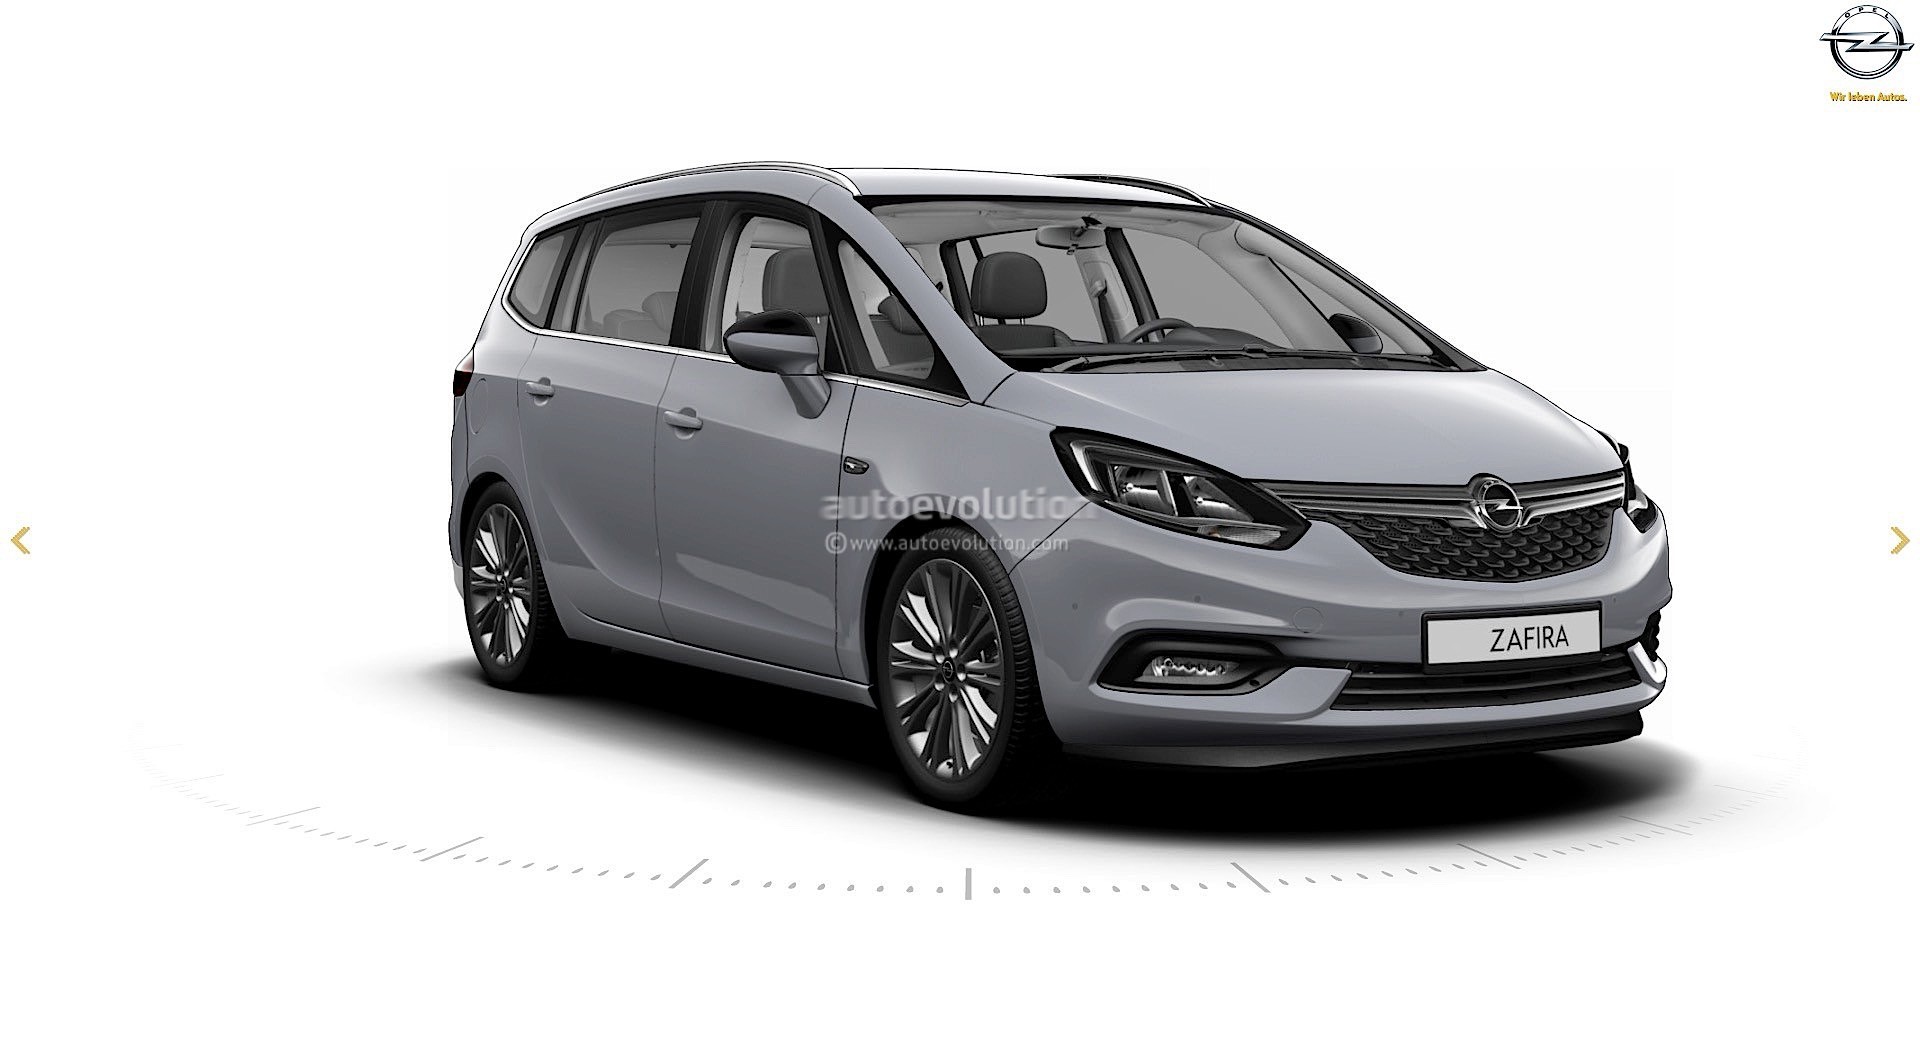 Opel Facelift Leaked On GM Website, Here Are The First Pics - autoevolution